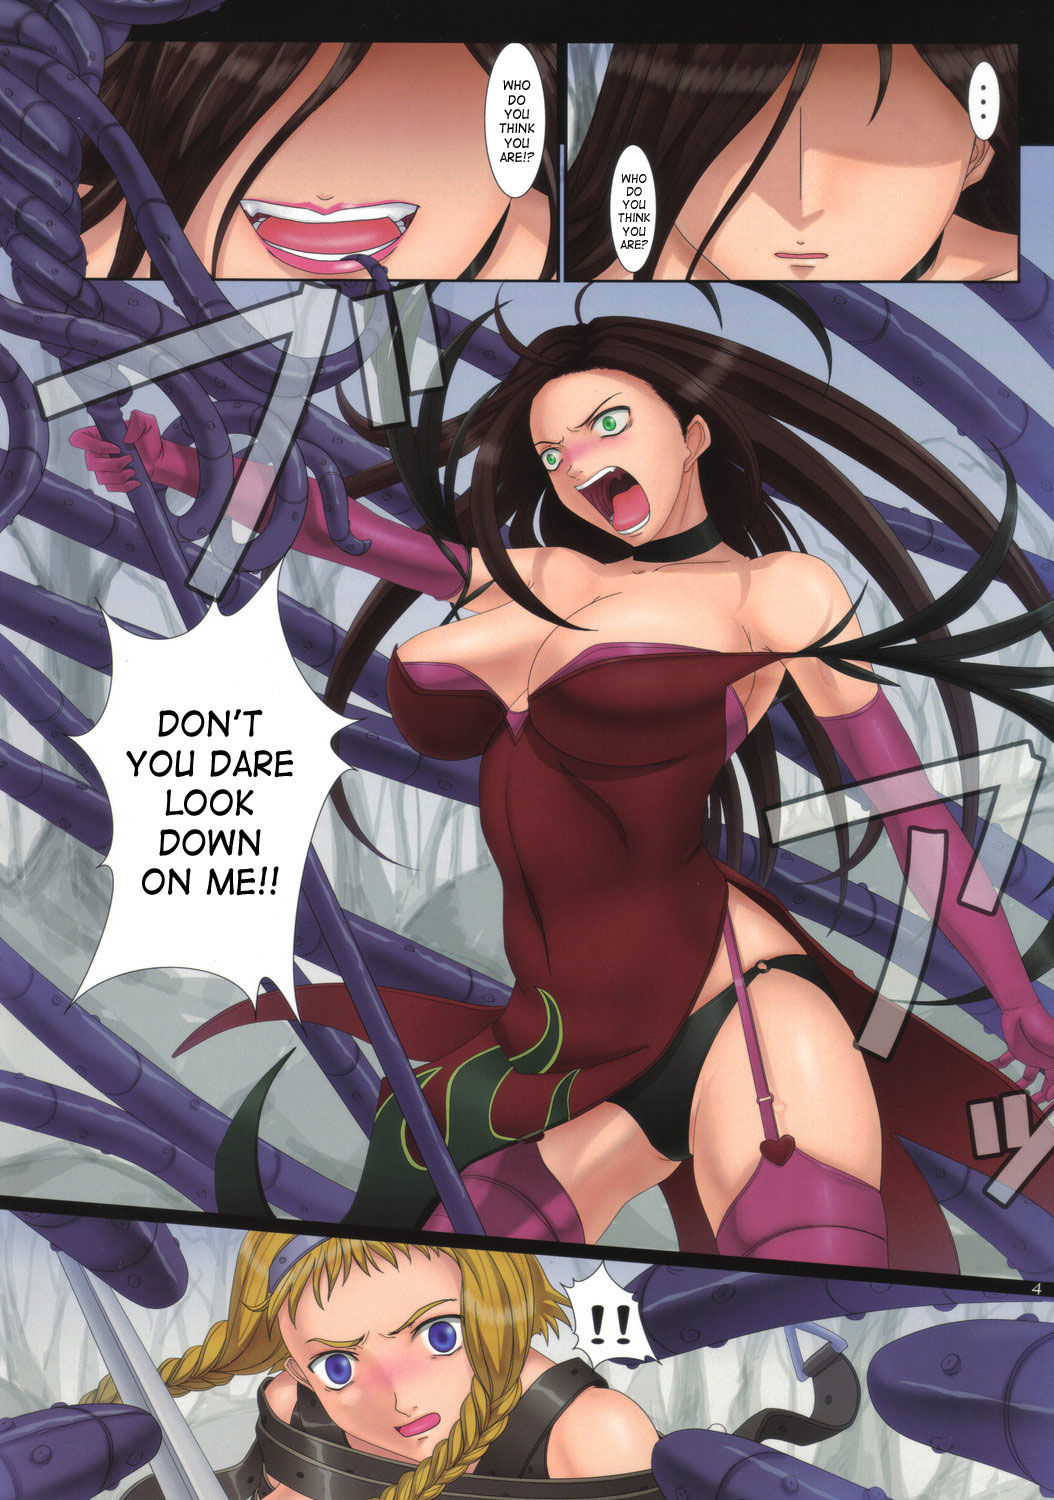 Tounyuu Fighting Big Tits Girl (Queens Blade) by orico page 5